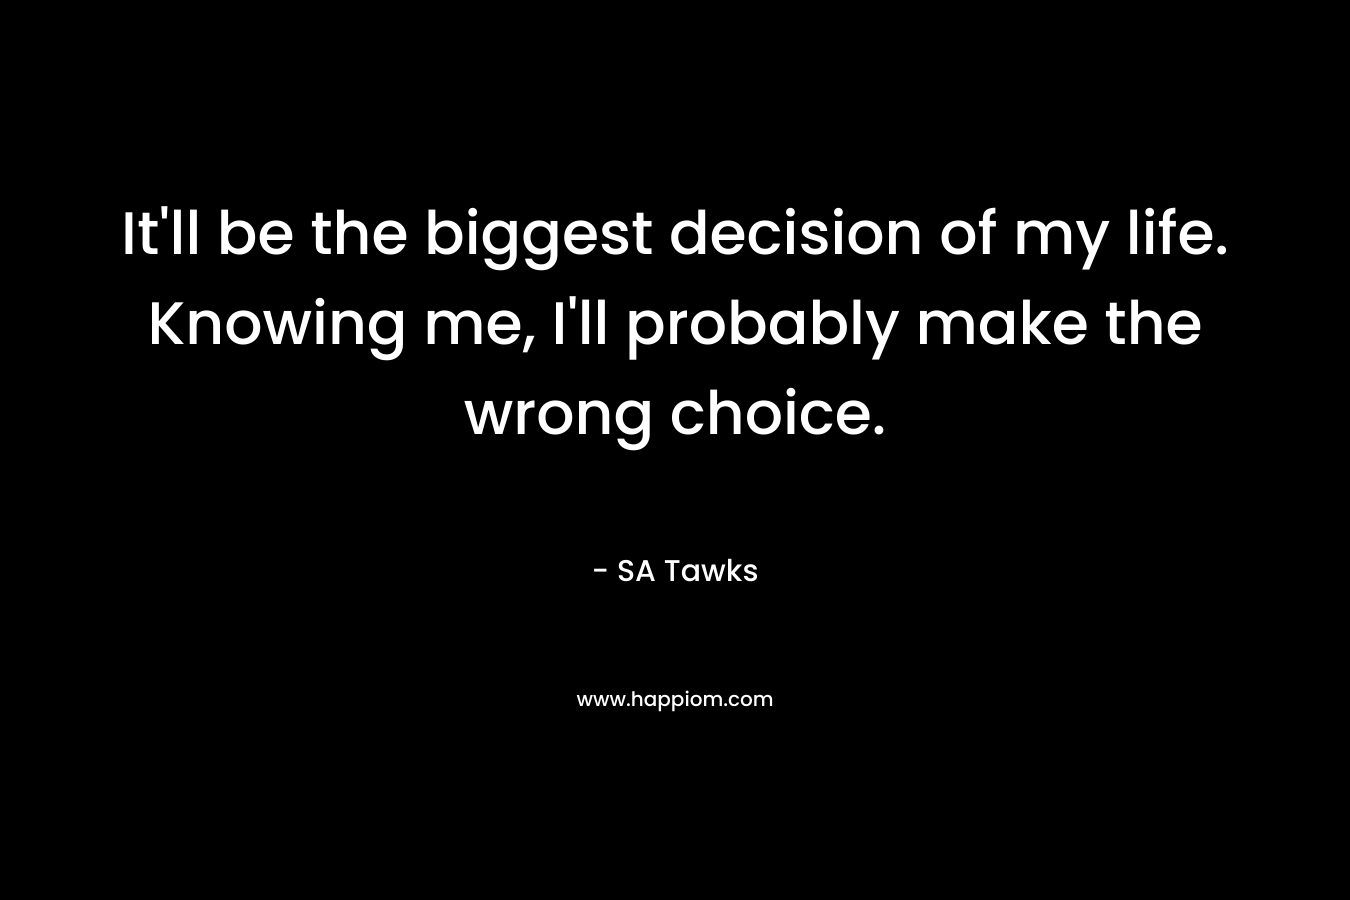 It'll be the biggest decision of my life. Knowing me, I'll probably make the wrong choice.